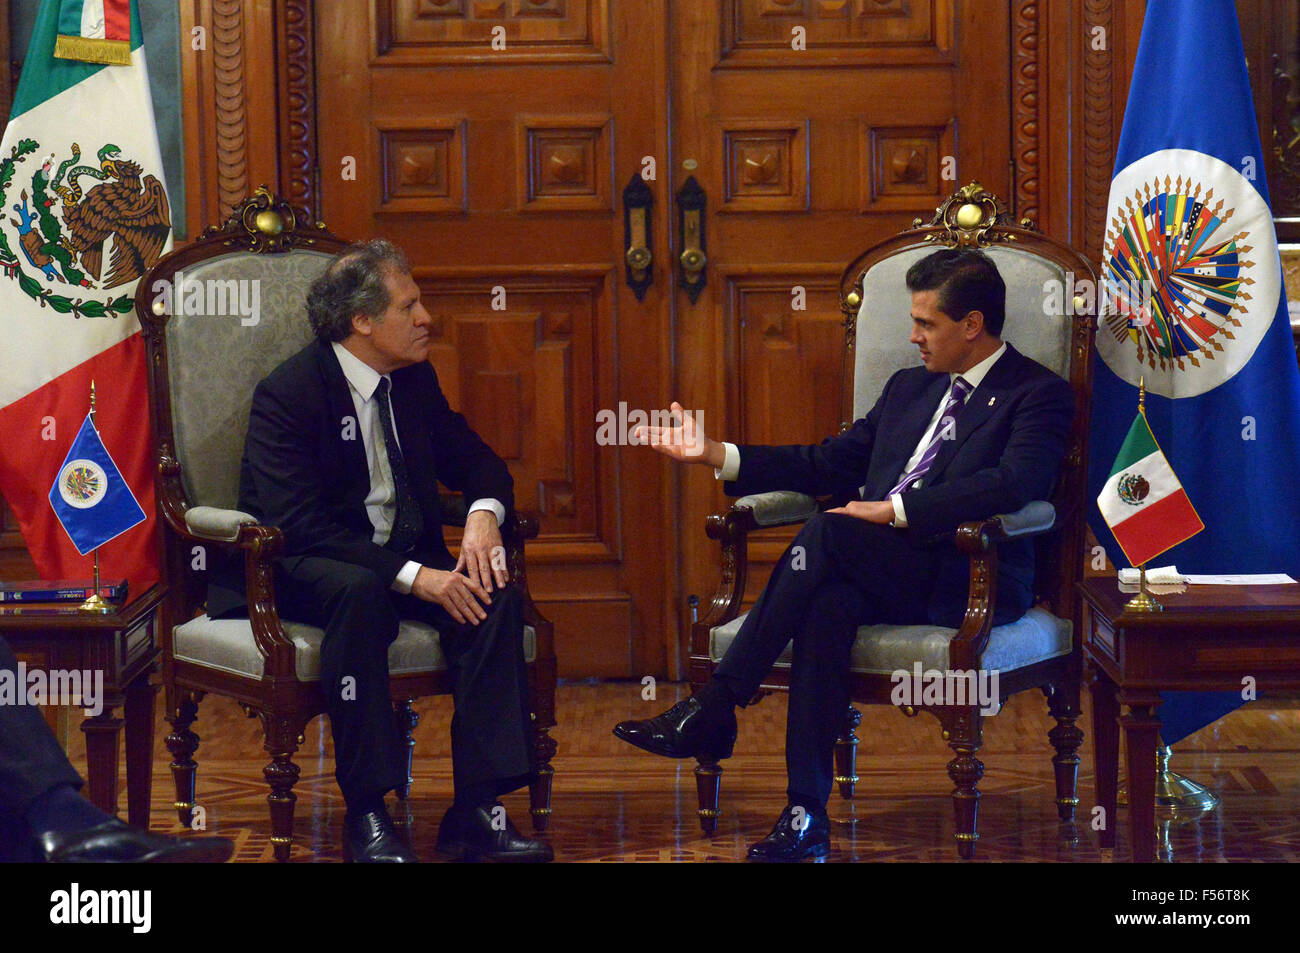 Mexico City, Mexico. 28th Oct, 2015. Image provided by Mexico's Presidency shows Mexican President Enrique Pena Nieto (R) meeting with Luis Almagro (L), Secretary General of the Organization of American States (OAS), at National Palace in Mexico City, capital of Mexico, Oct. 28, 2015. © Mexico's Presidency/Xinhua/Alamy Live News Stock Photo